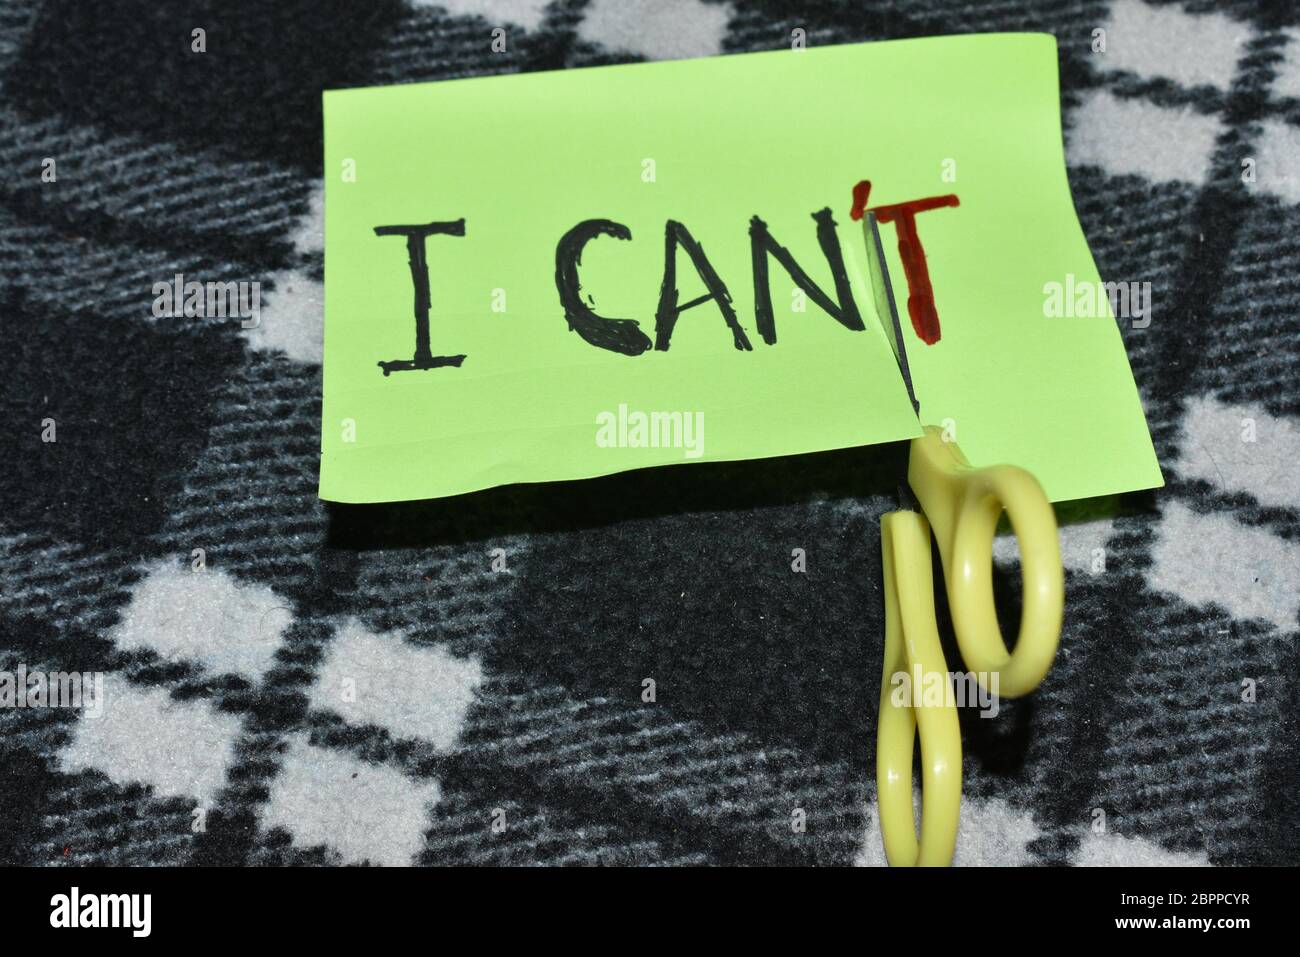 I can self motivation - cutting the letter 'T' of the written word I can't so it says I can, goal achievement, potential, overcoming Stock Photo